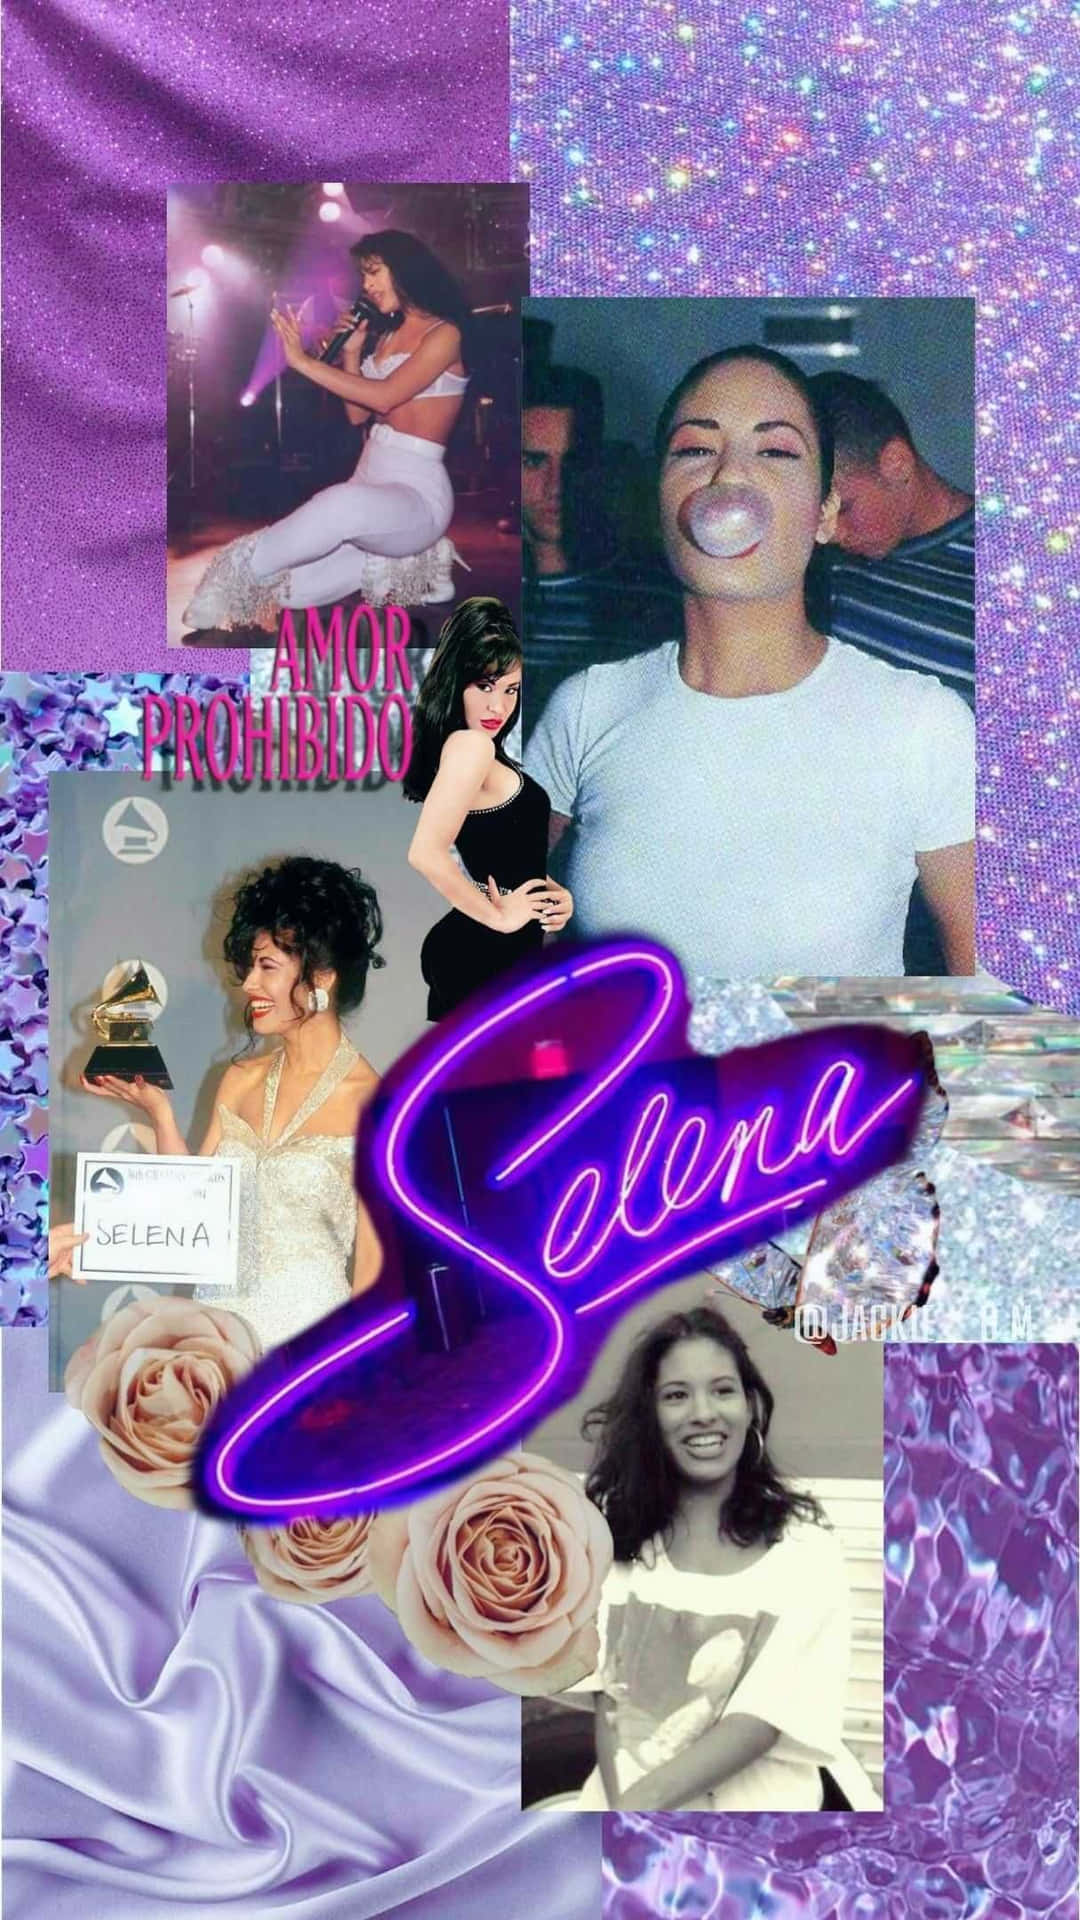 Show Off Your Love for Latina Icon Selena Quintanilla With This Stylish Iphone Wallpaper